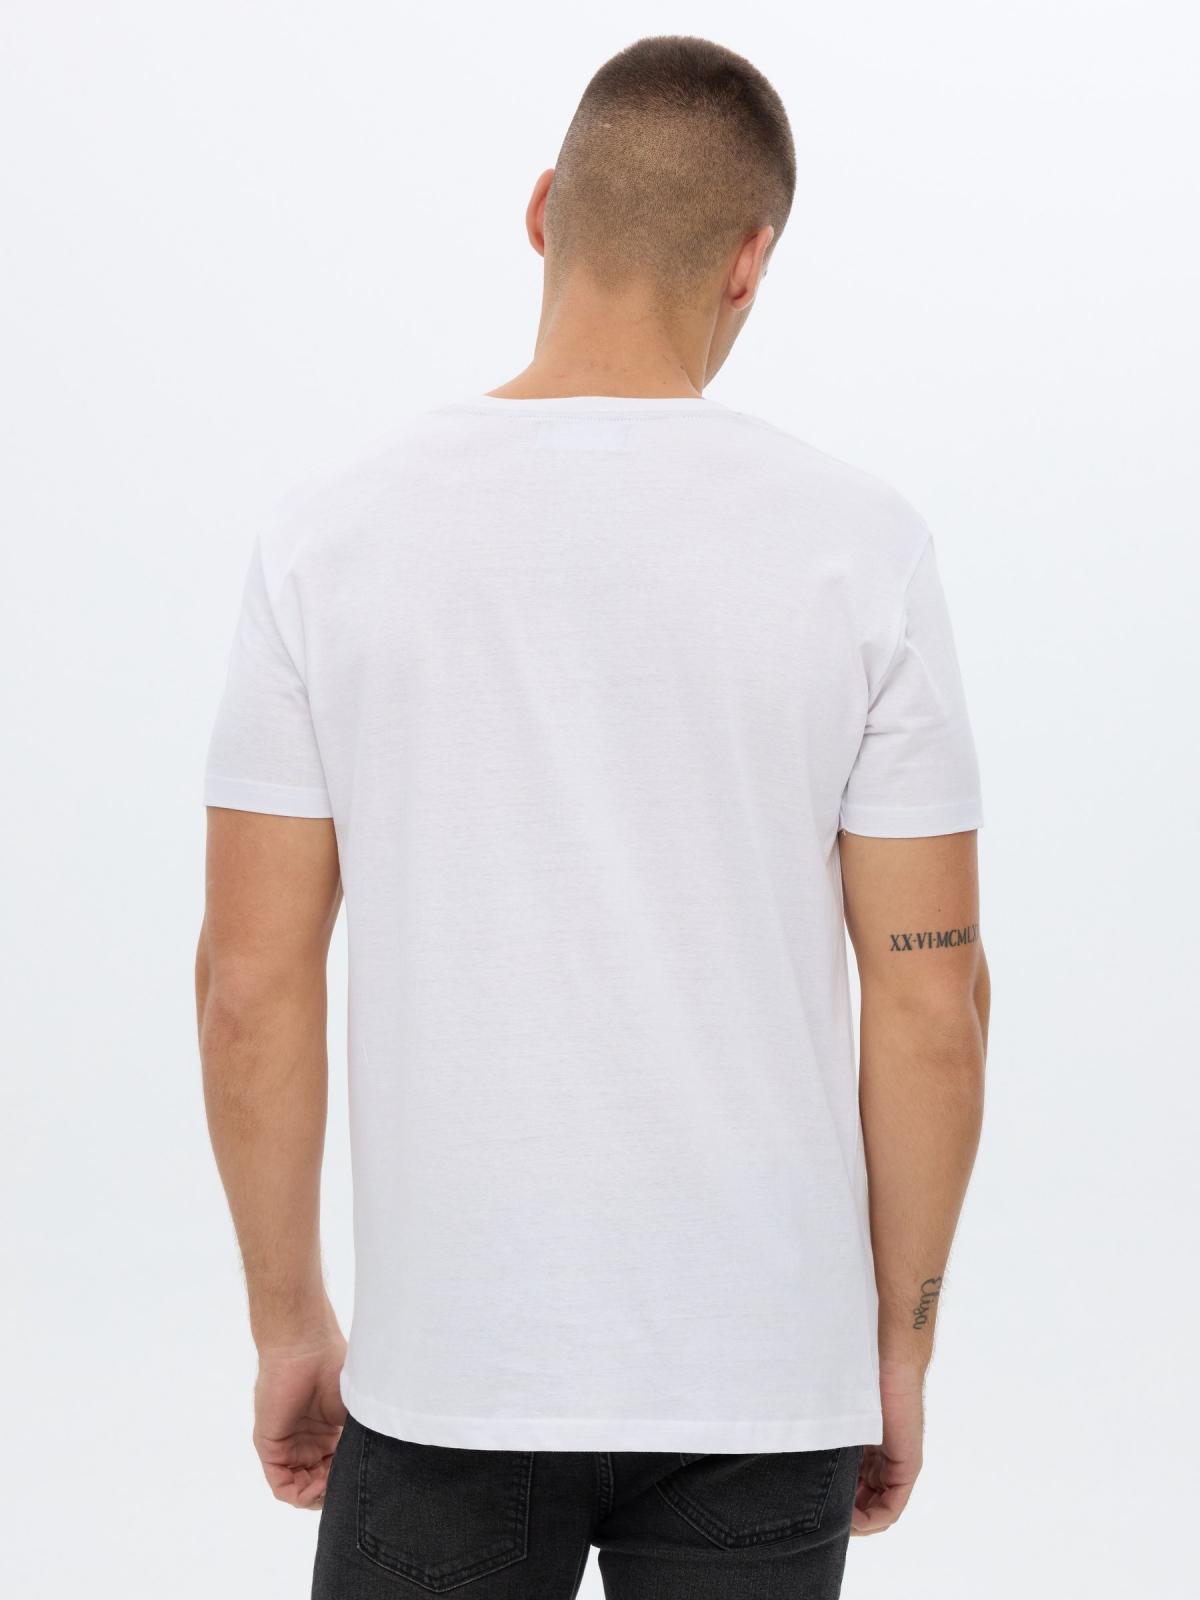 Skull printed t-shirt white middle back view